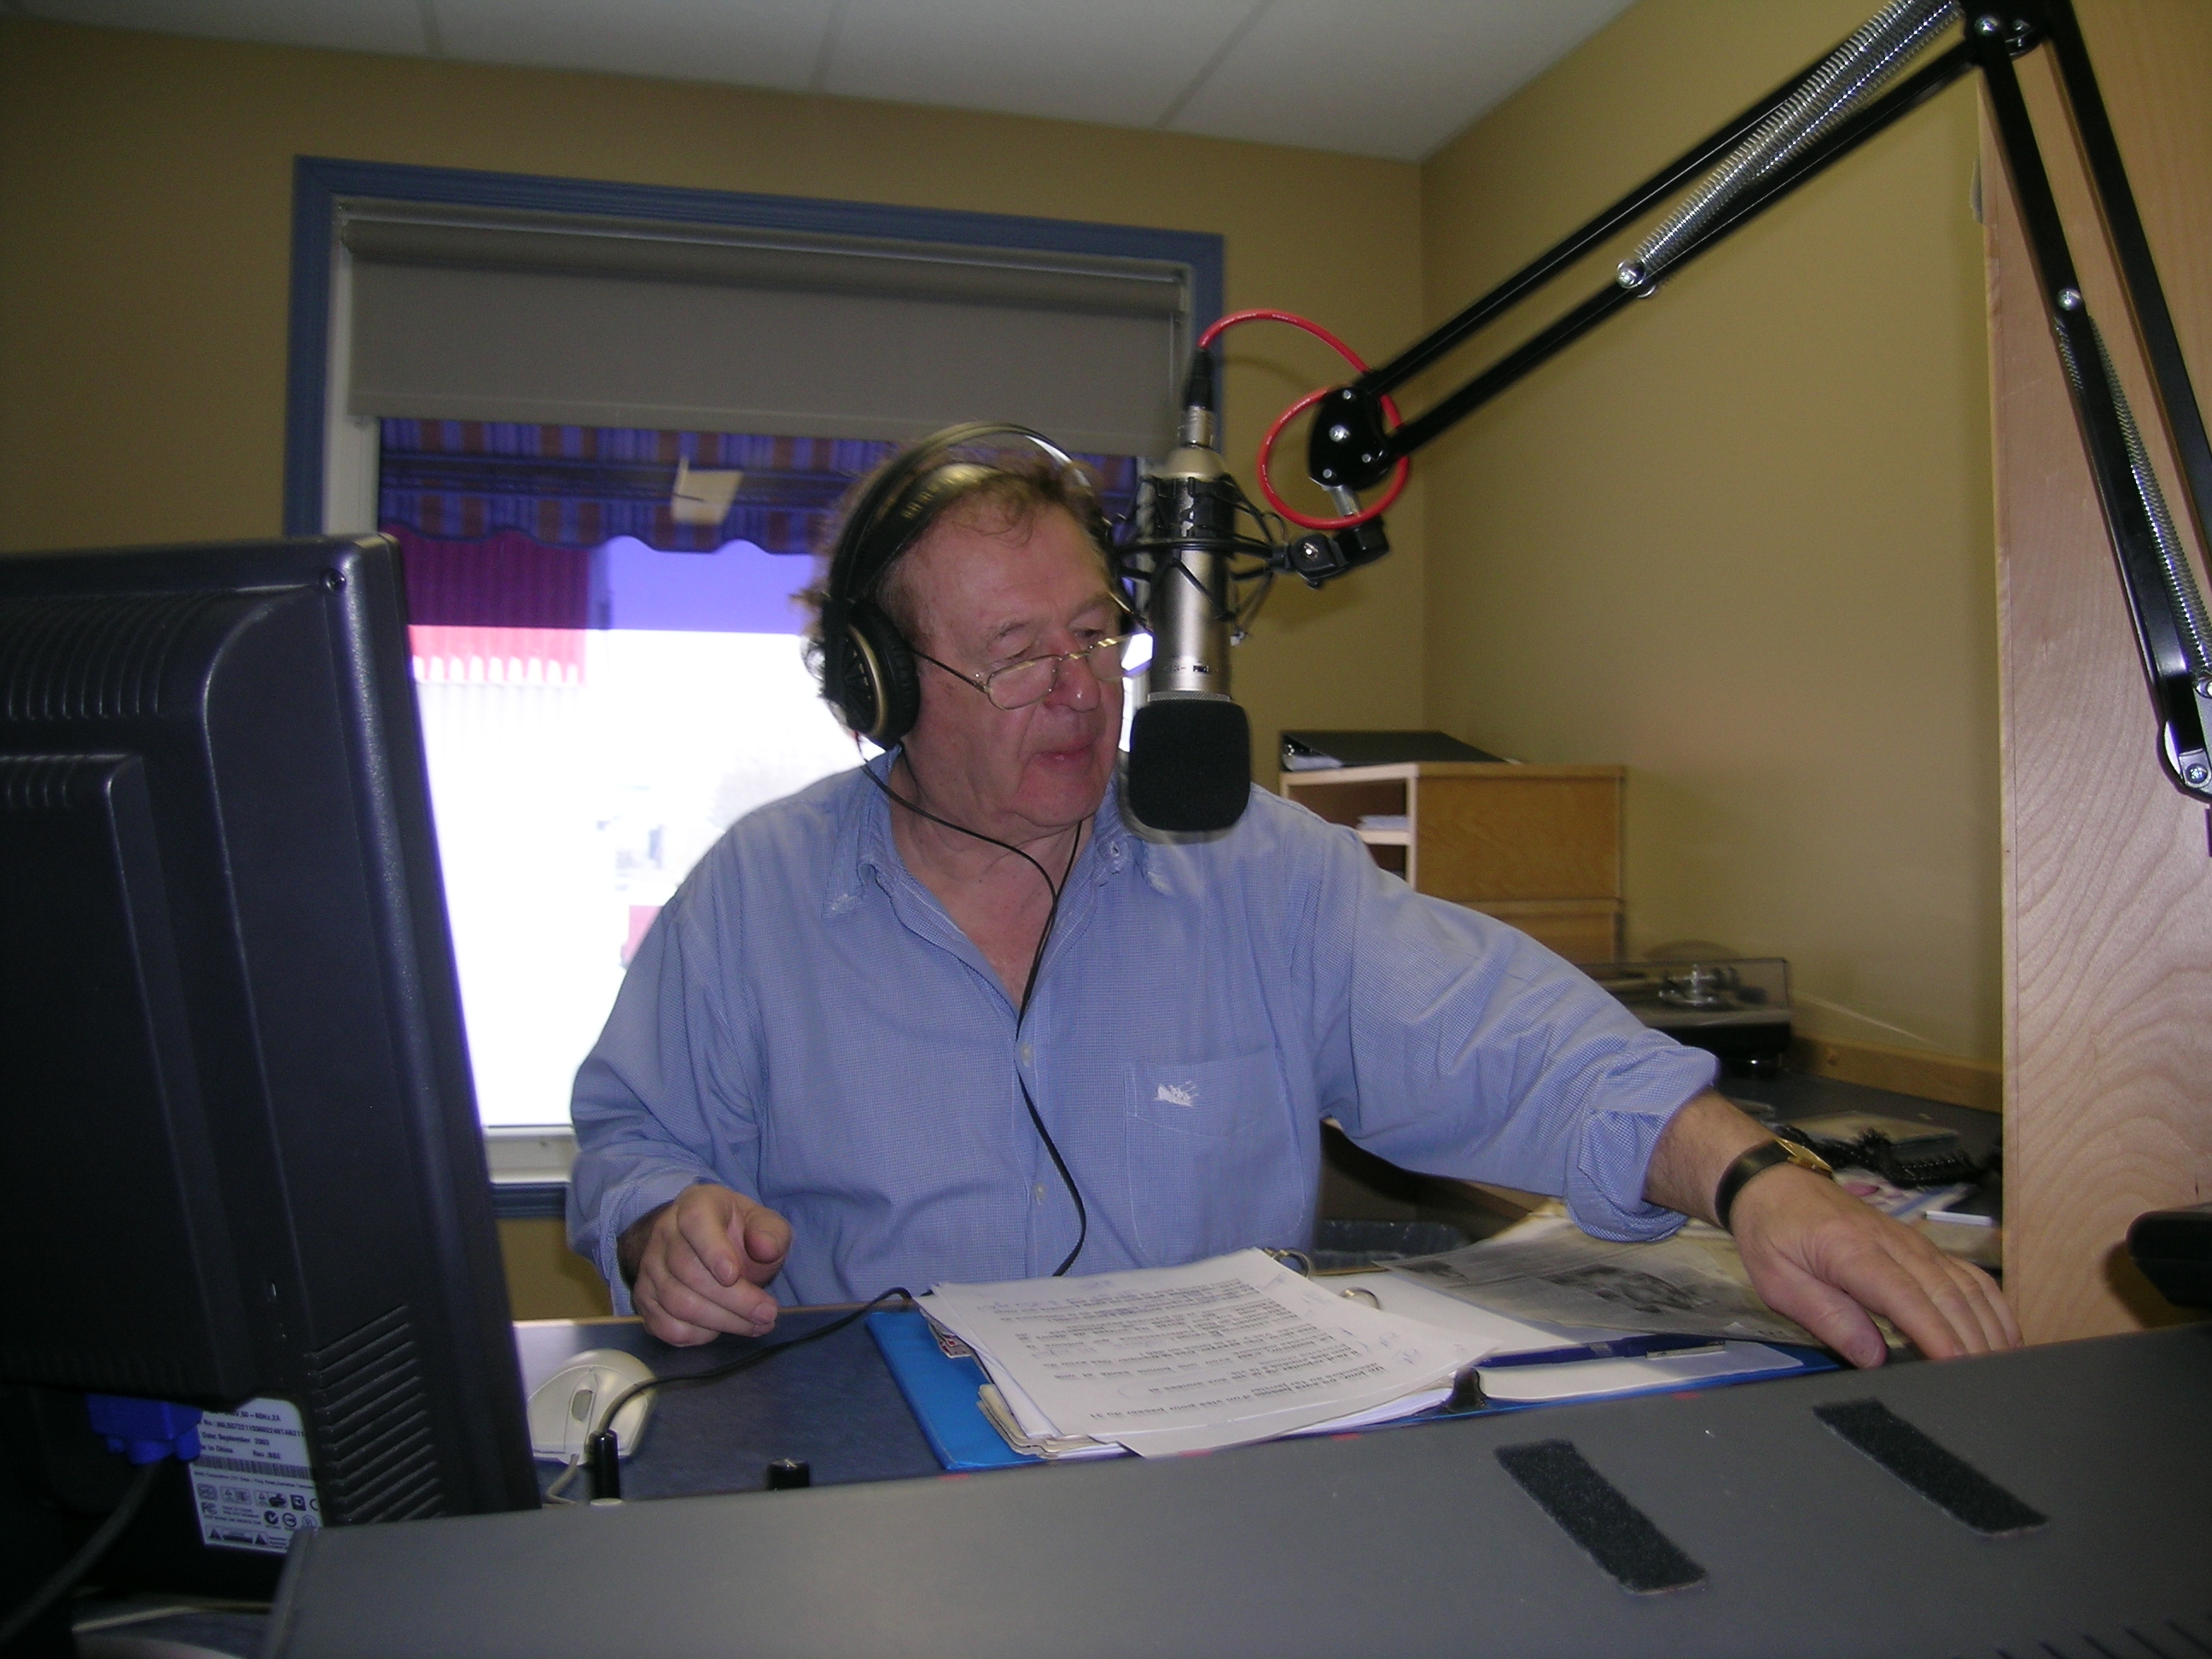 Whether in CJBR radio-tele, CFER-TV, CFLP, CKMN, Jean Brisson has always had this passion to inform, entertain and connect with his fans.